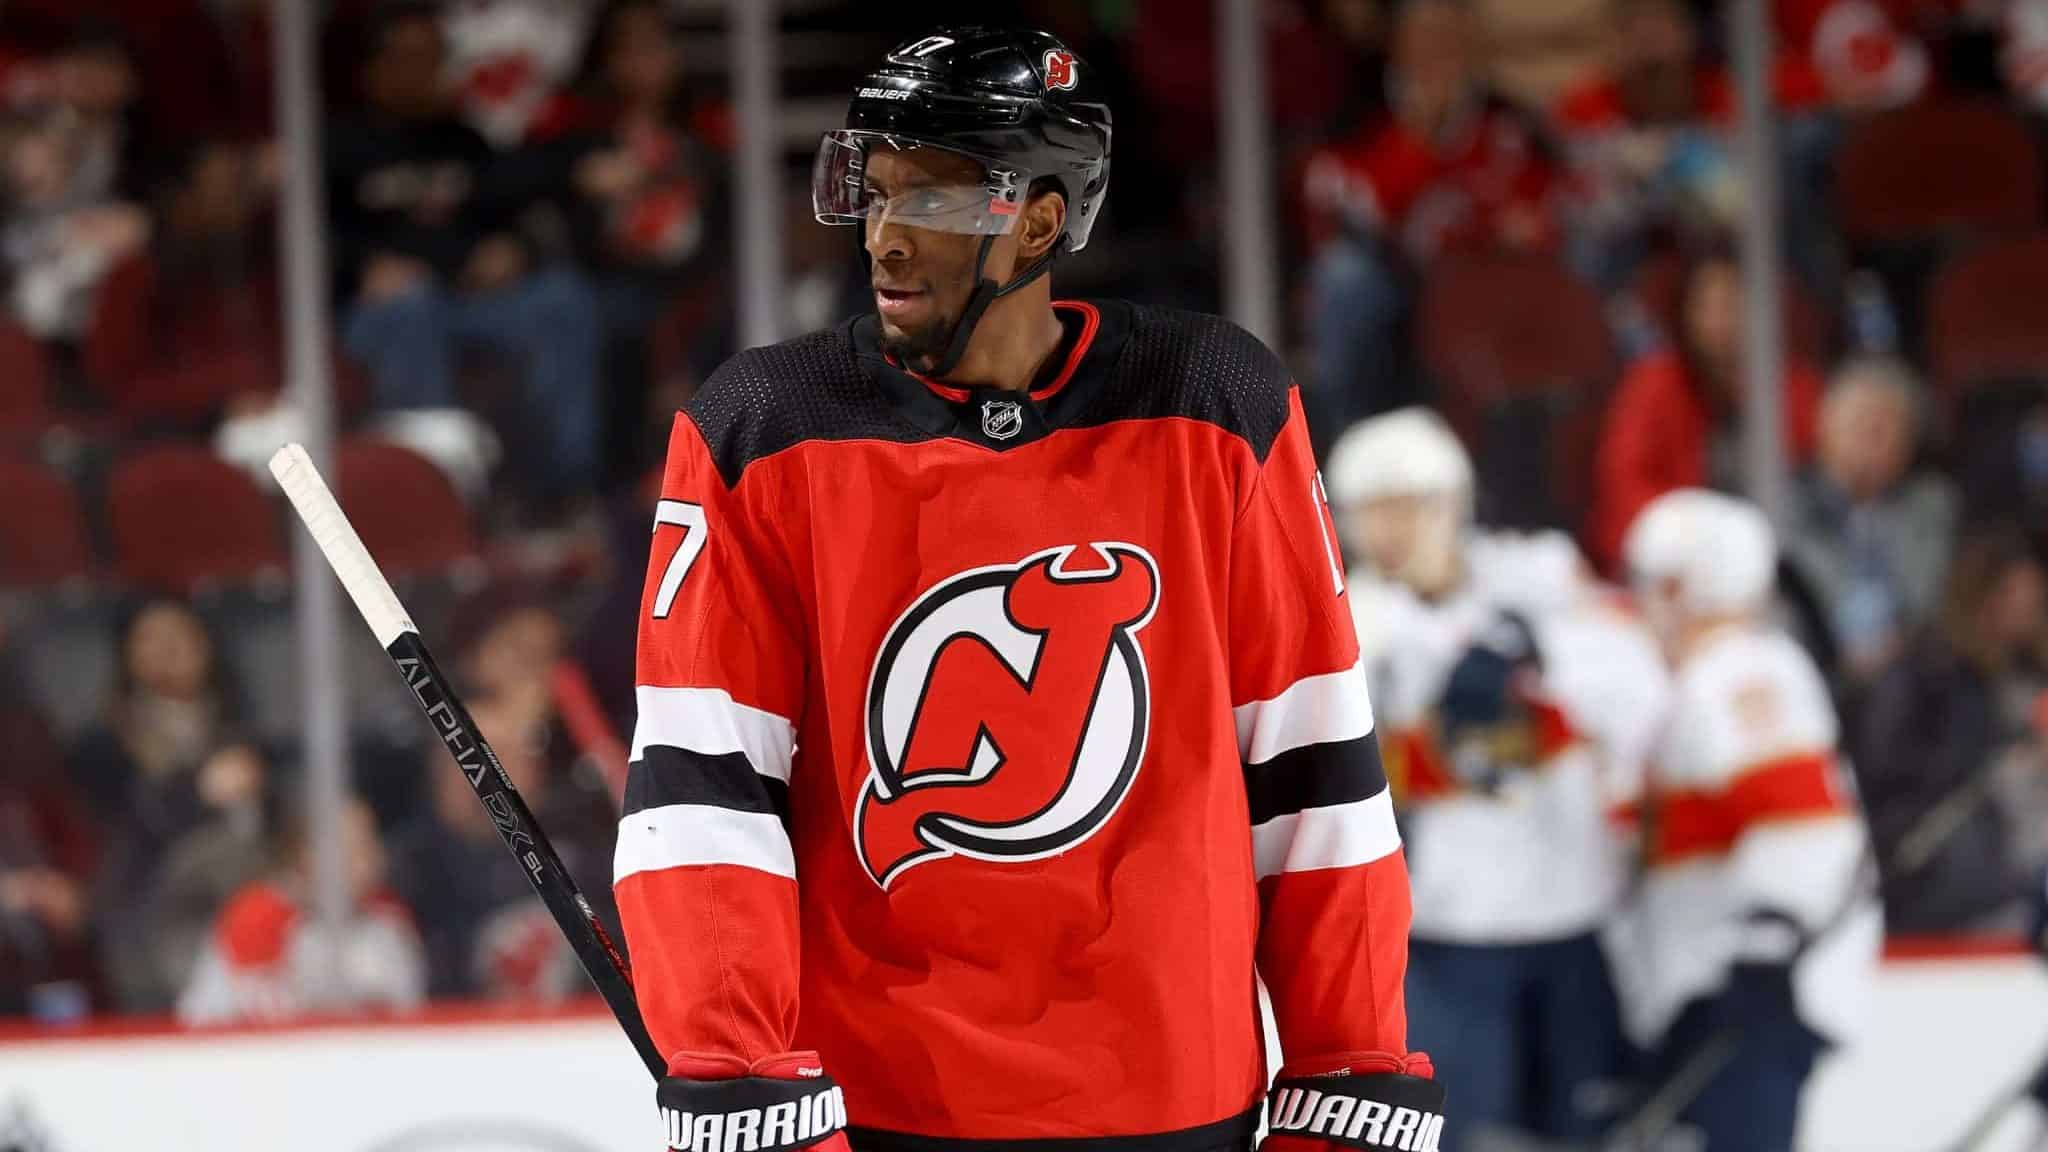 NEWARK, NEW JERSEY - FEBRUARY 11: Wayne Simmonds #17 of the New Jersey Devils reacts after the Florida Panthers scored in the second period at Prudential Center on February 11, 2020 in Newark, New Jersey.